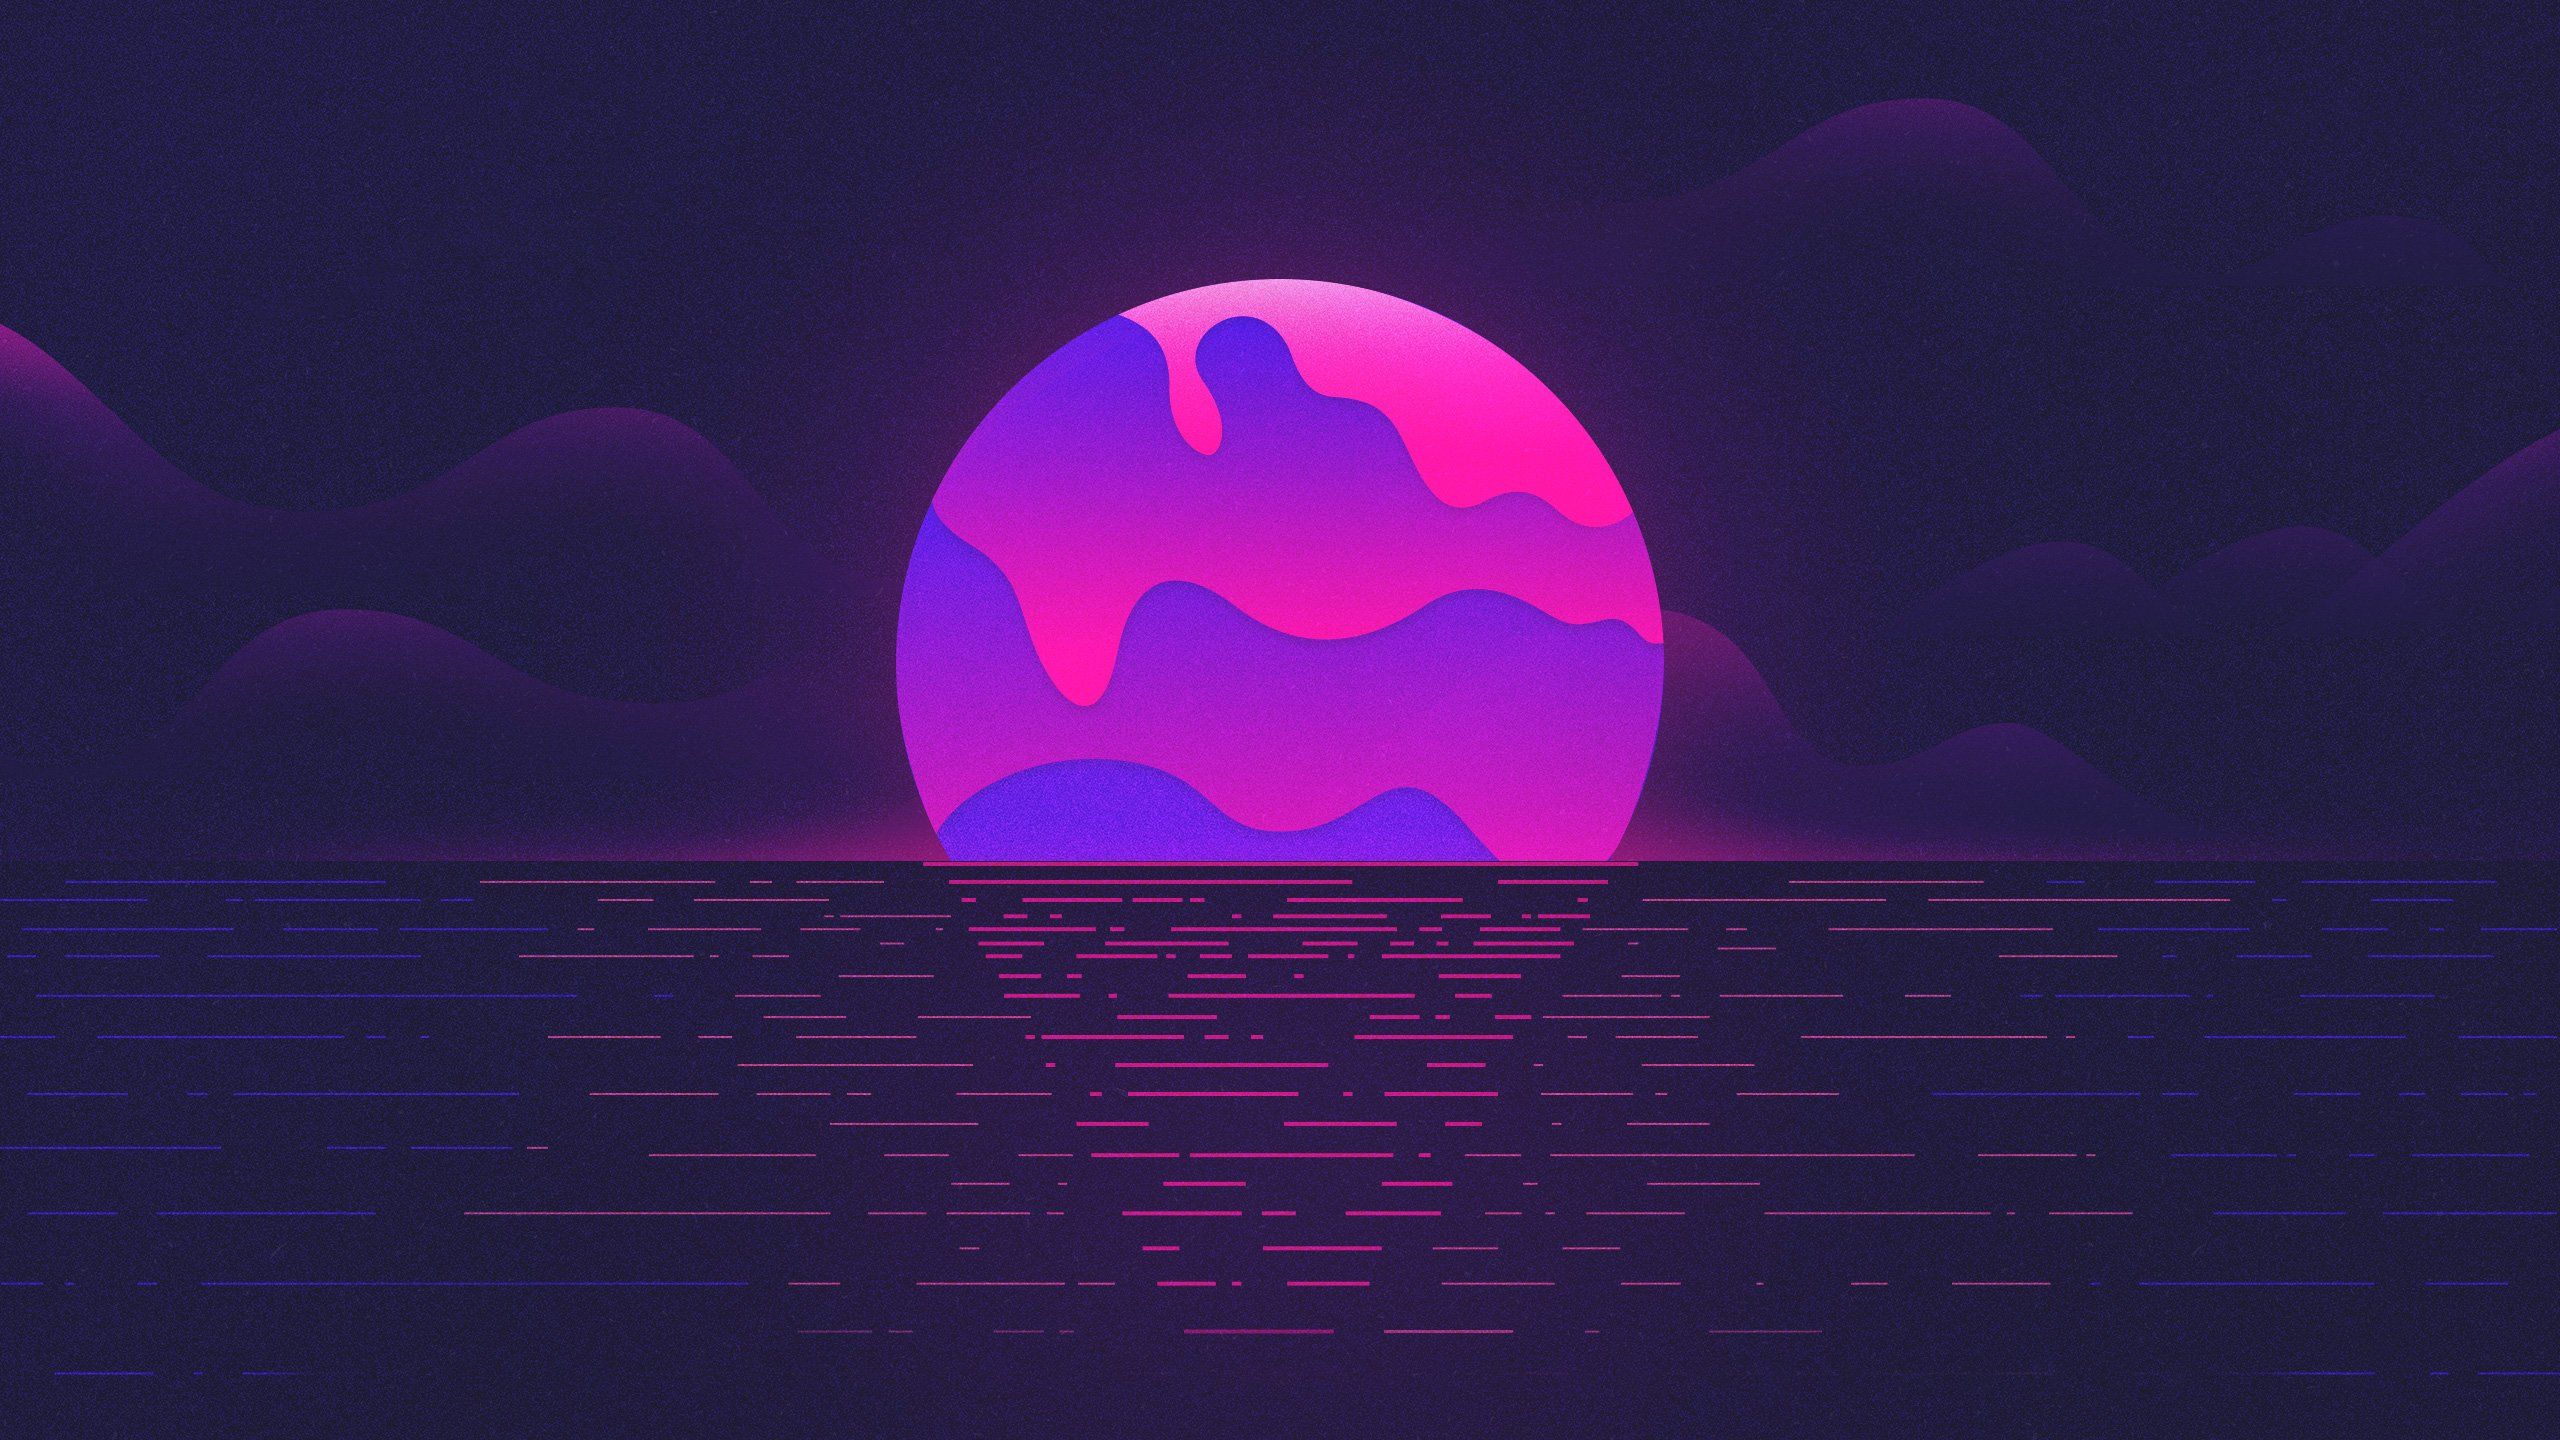 A sunset over a body of water with mountains in the background - Dark vaporwave